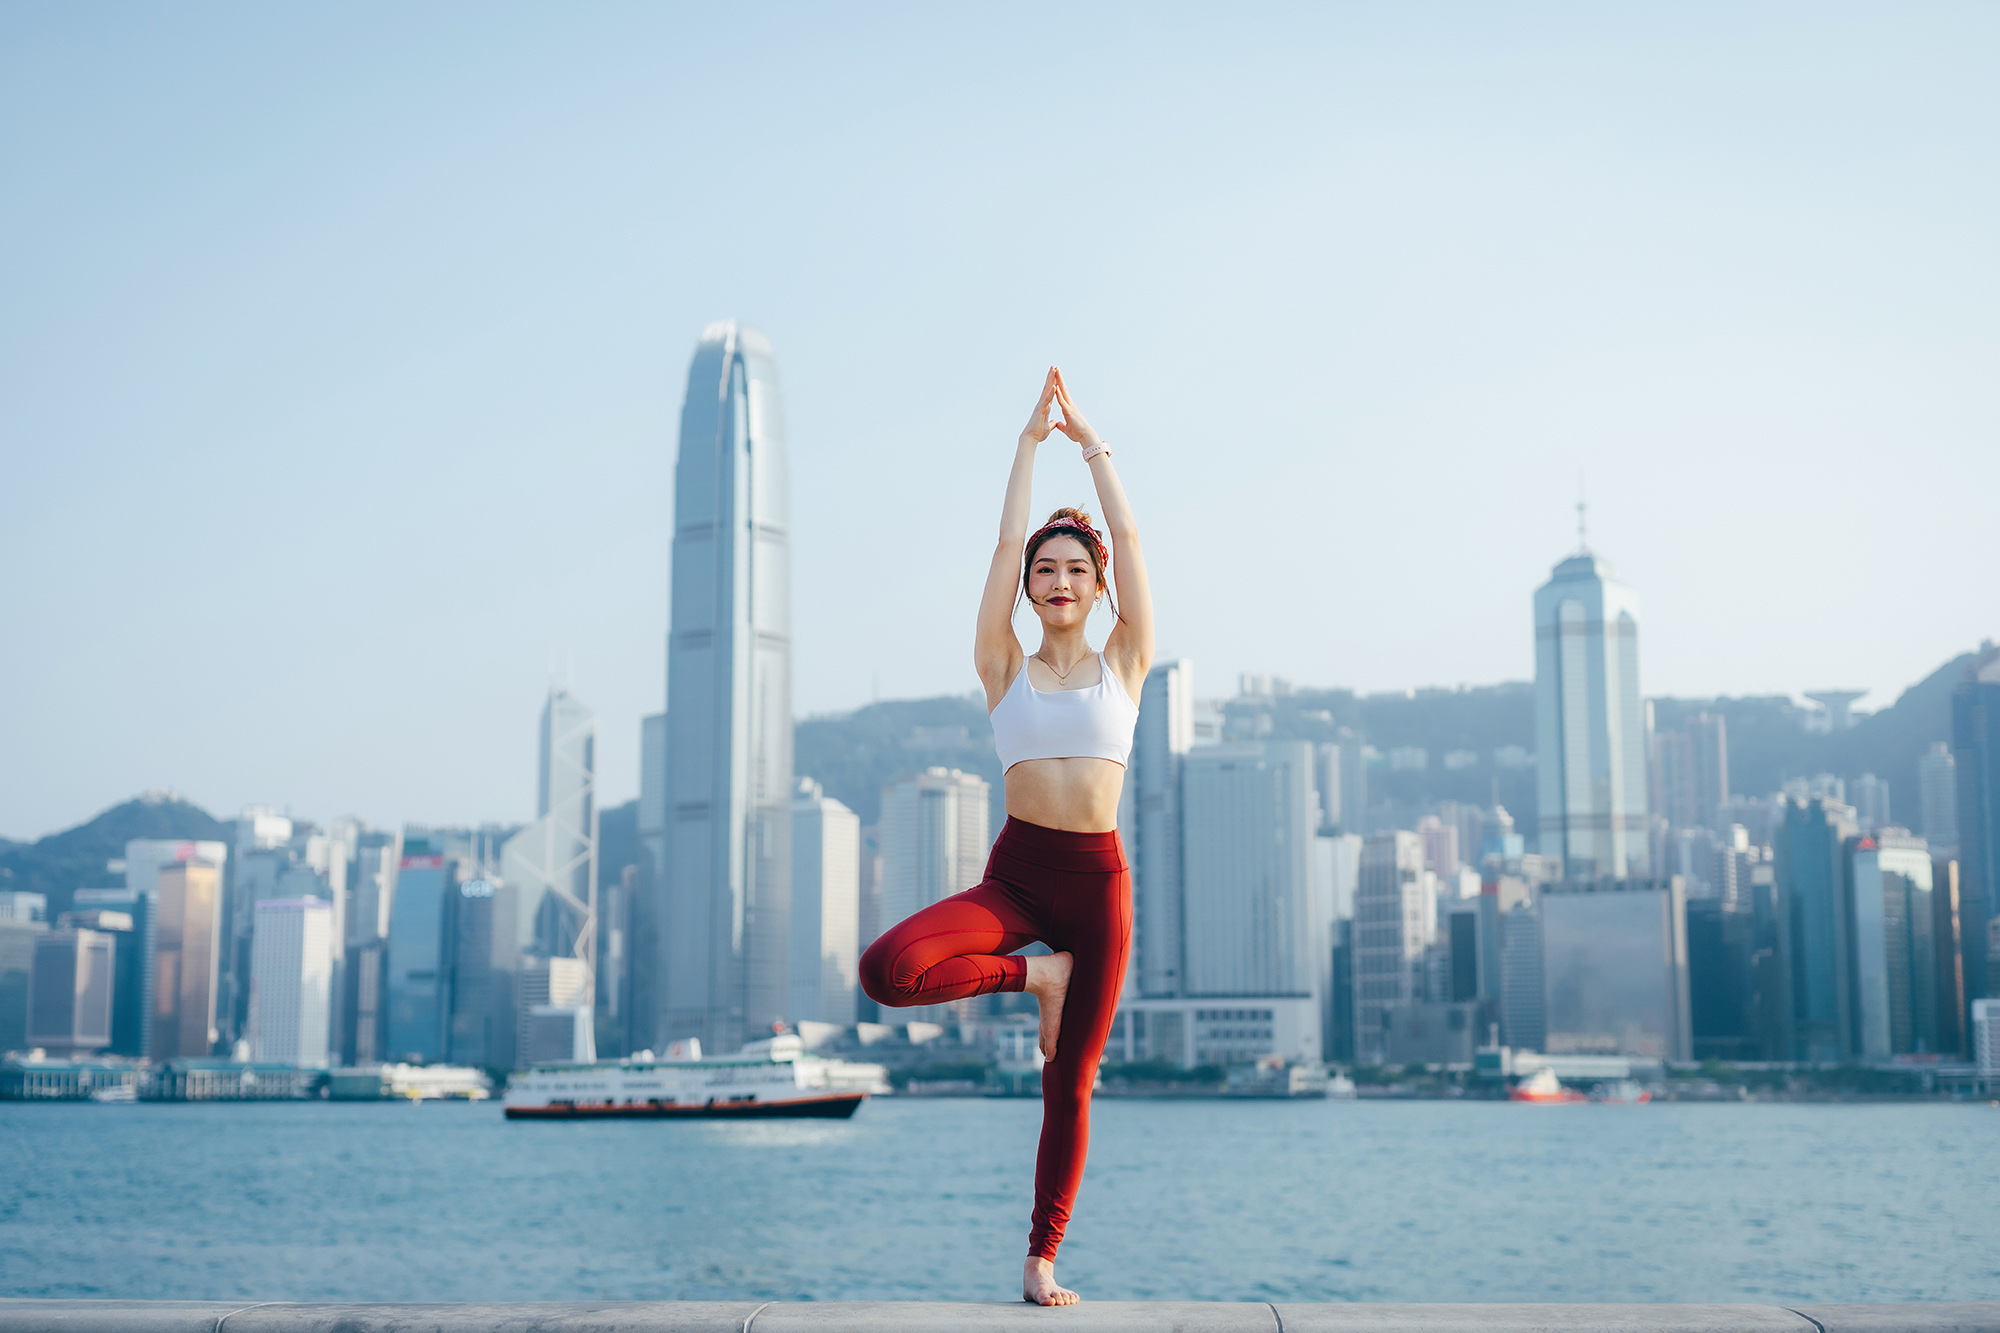 ATHLETIC CLUB Personal Training Hong Kong – Sustainable personal